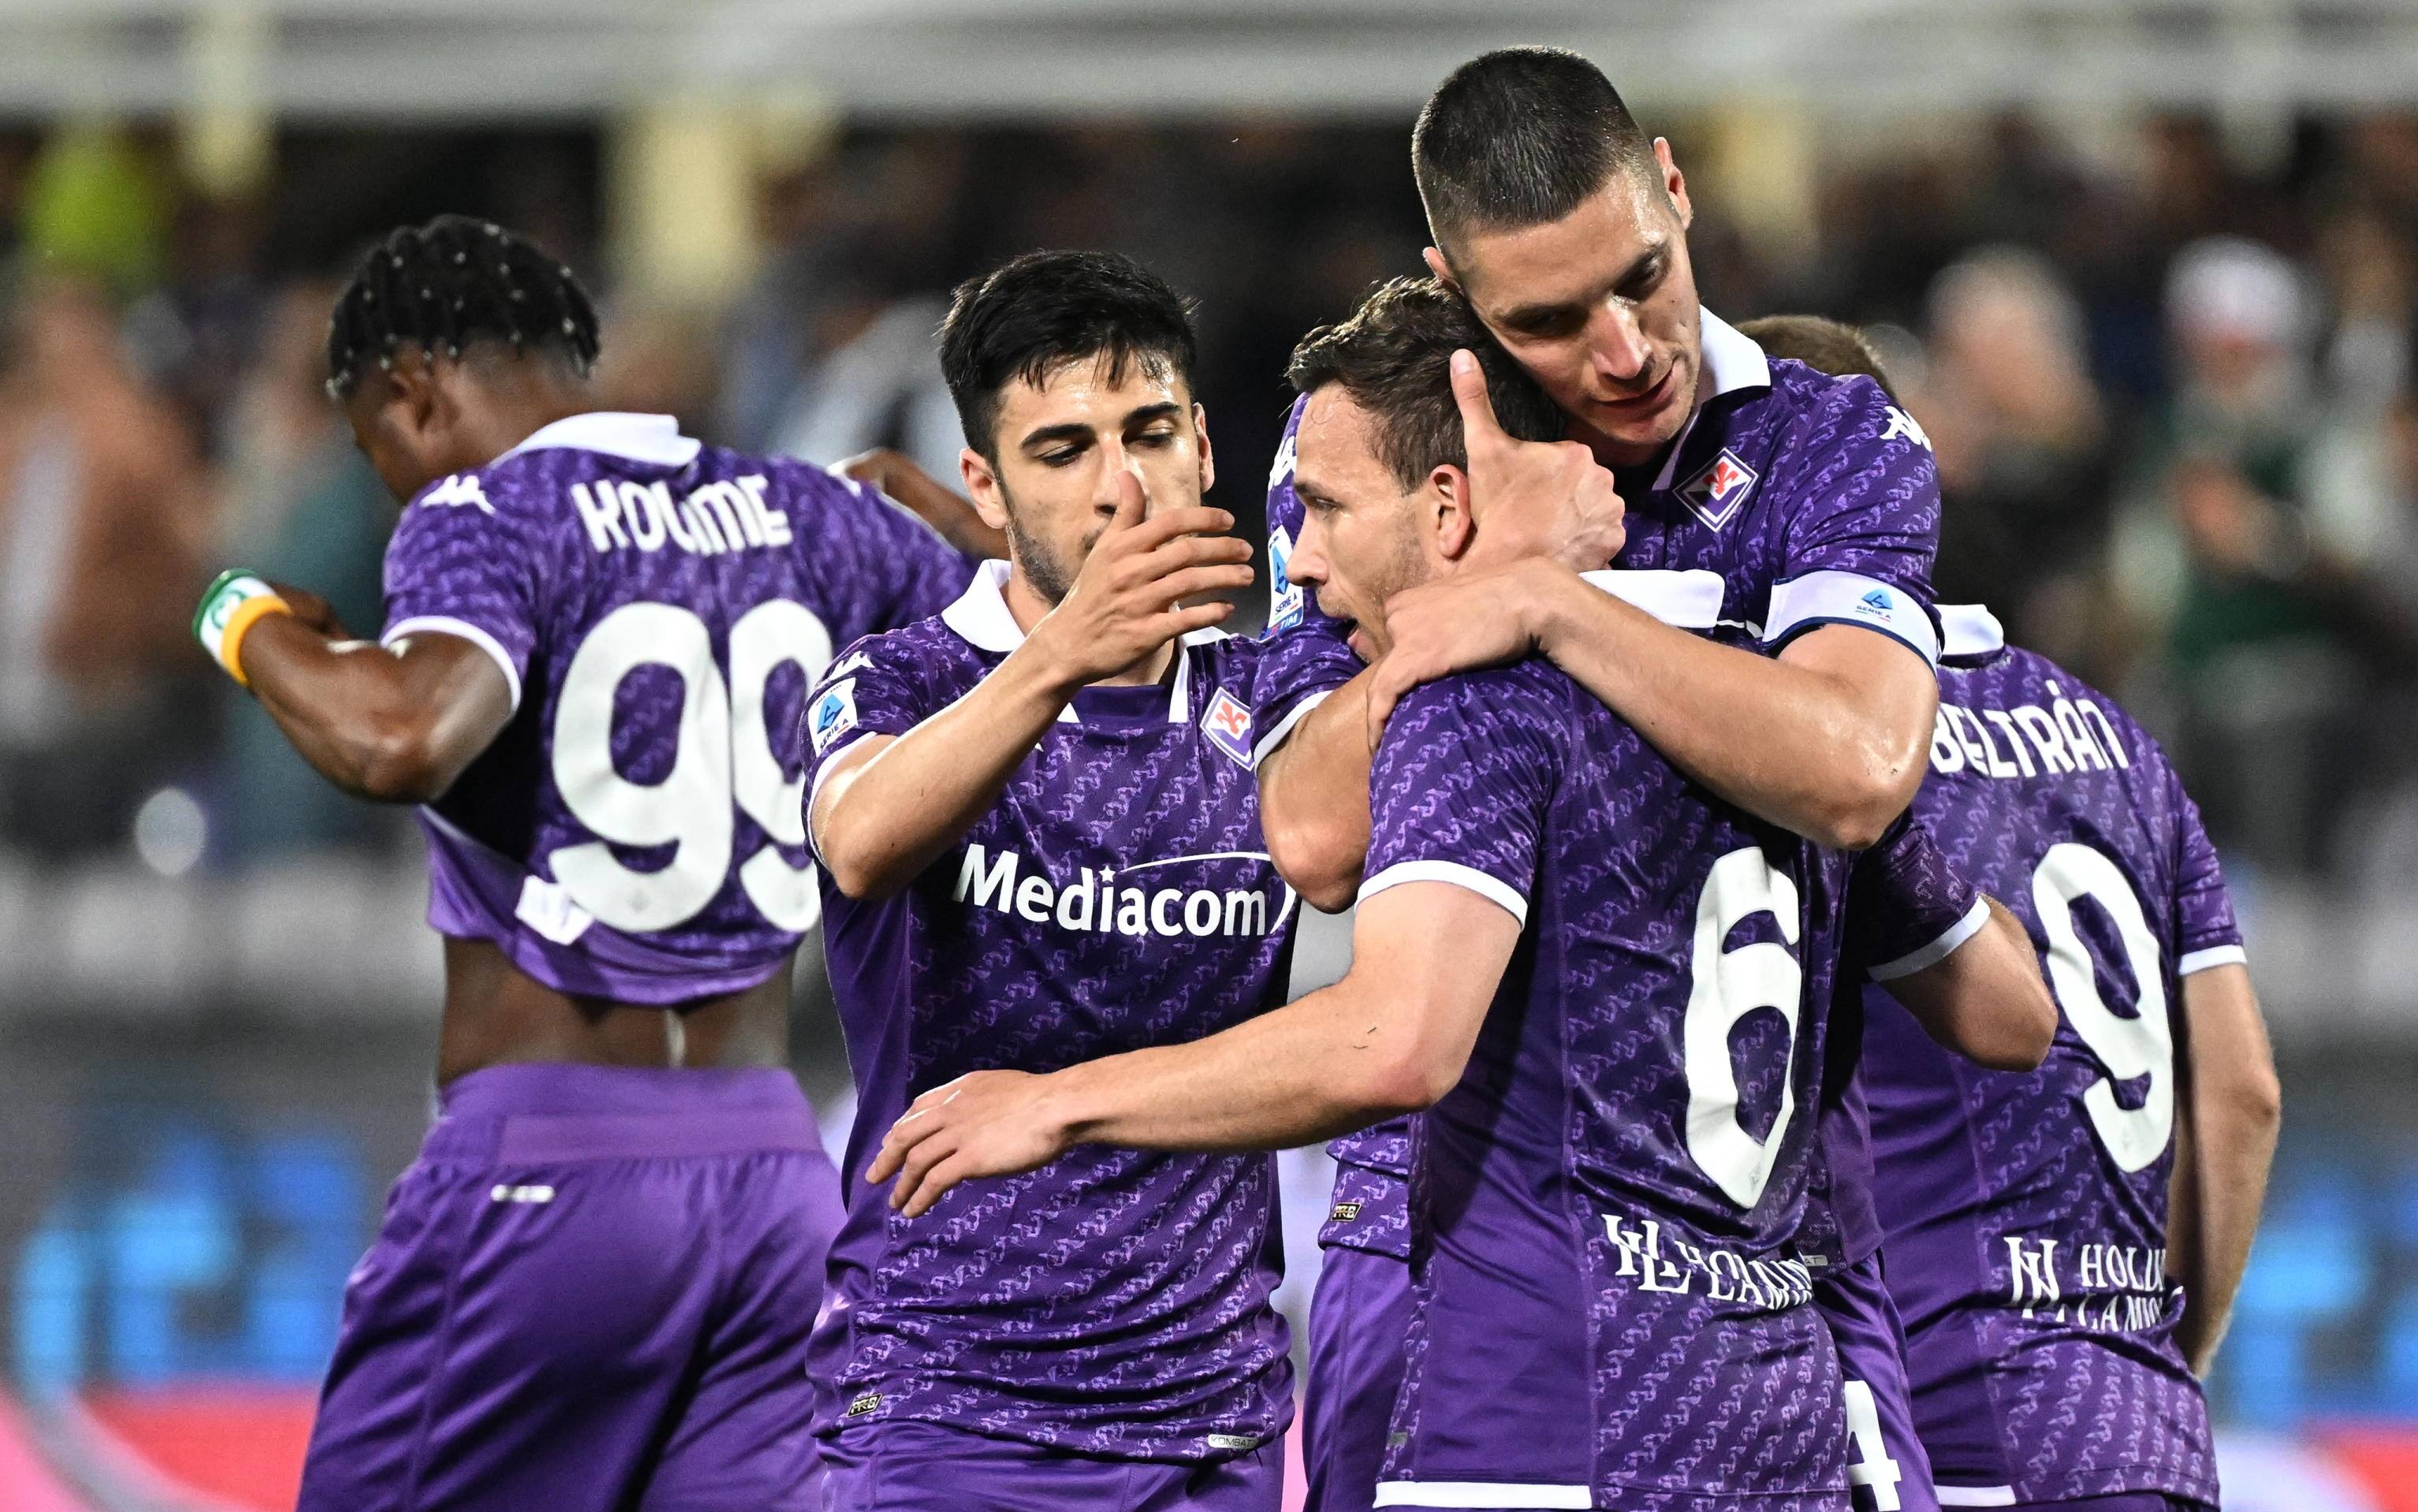 Fiorentina's midfielder Arthur Melo celebrates after scoring a goal during the Serie A soccer match ACF Fiorentina vs AC Monza at Artemio Franchi Stadium in Florence, Italy, 13 May  2024
ANSA/CLAUDIO GIOVANNINI